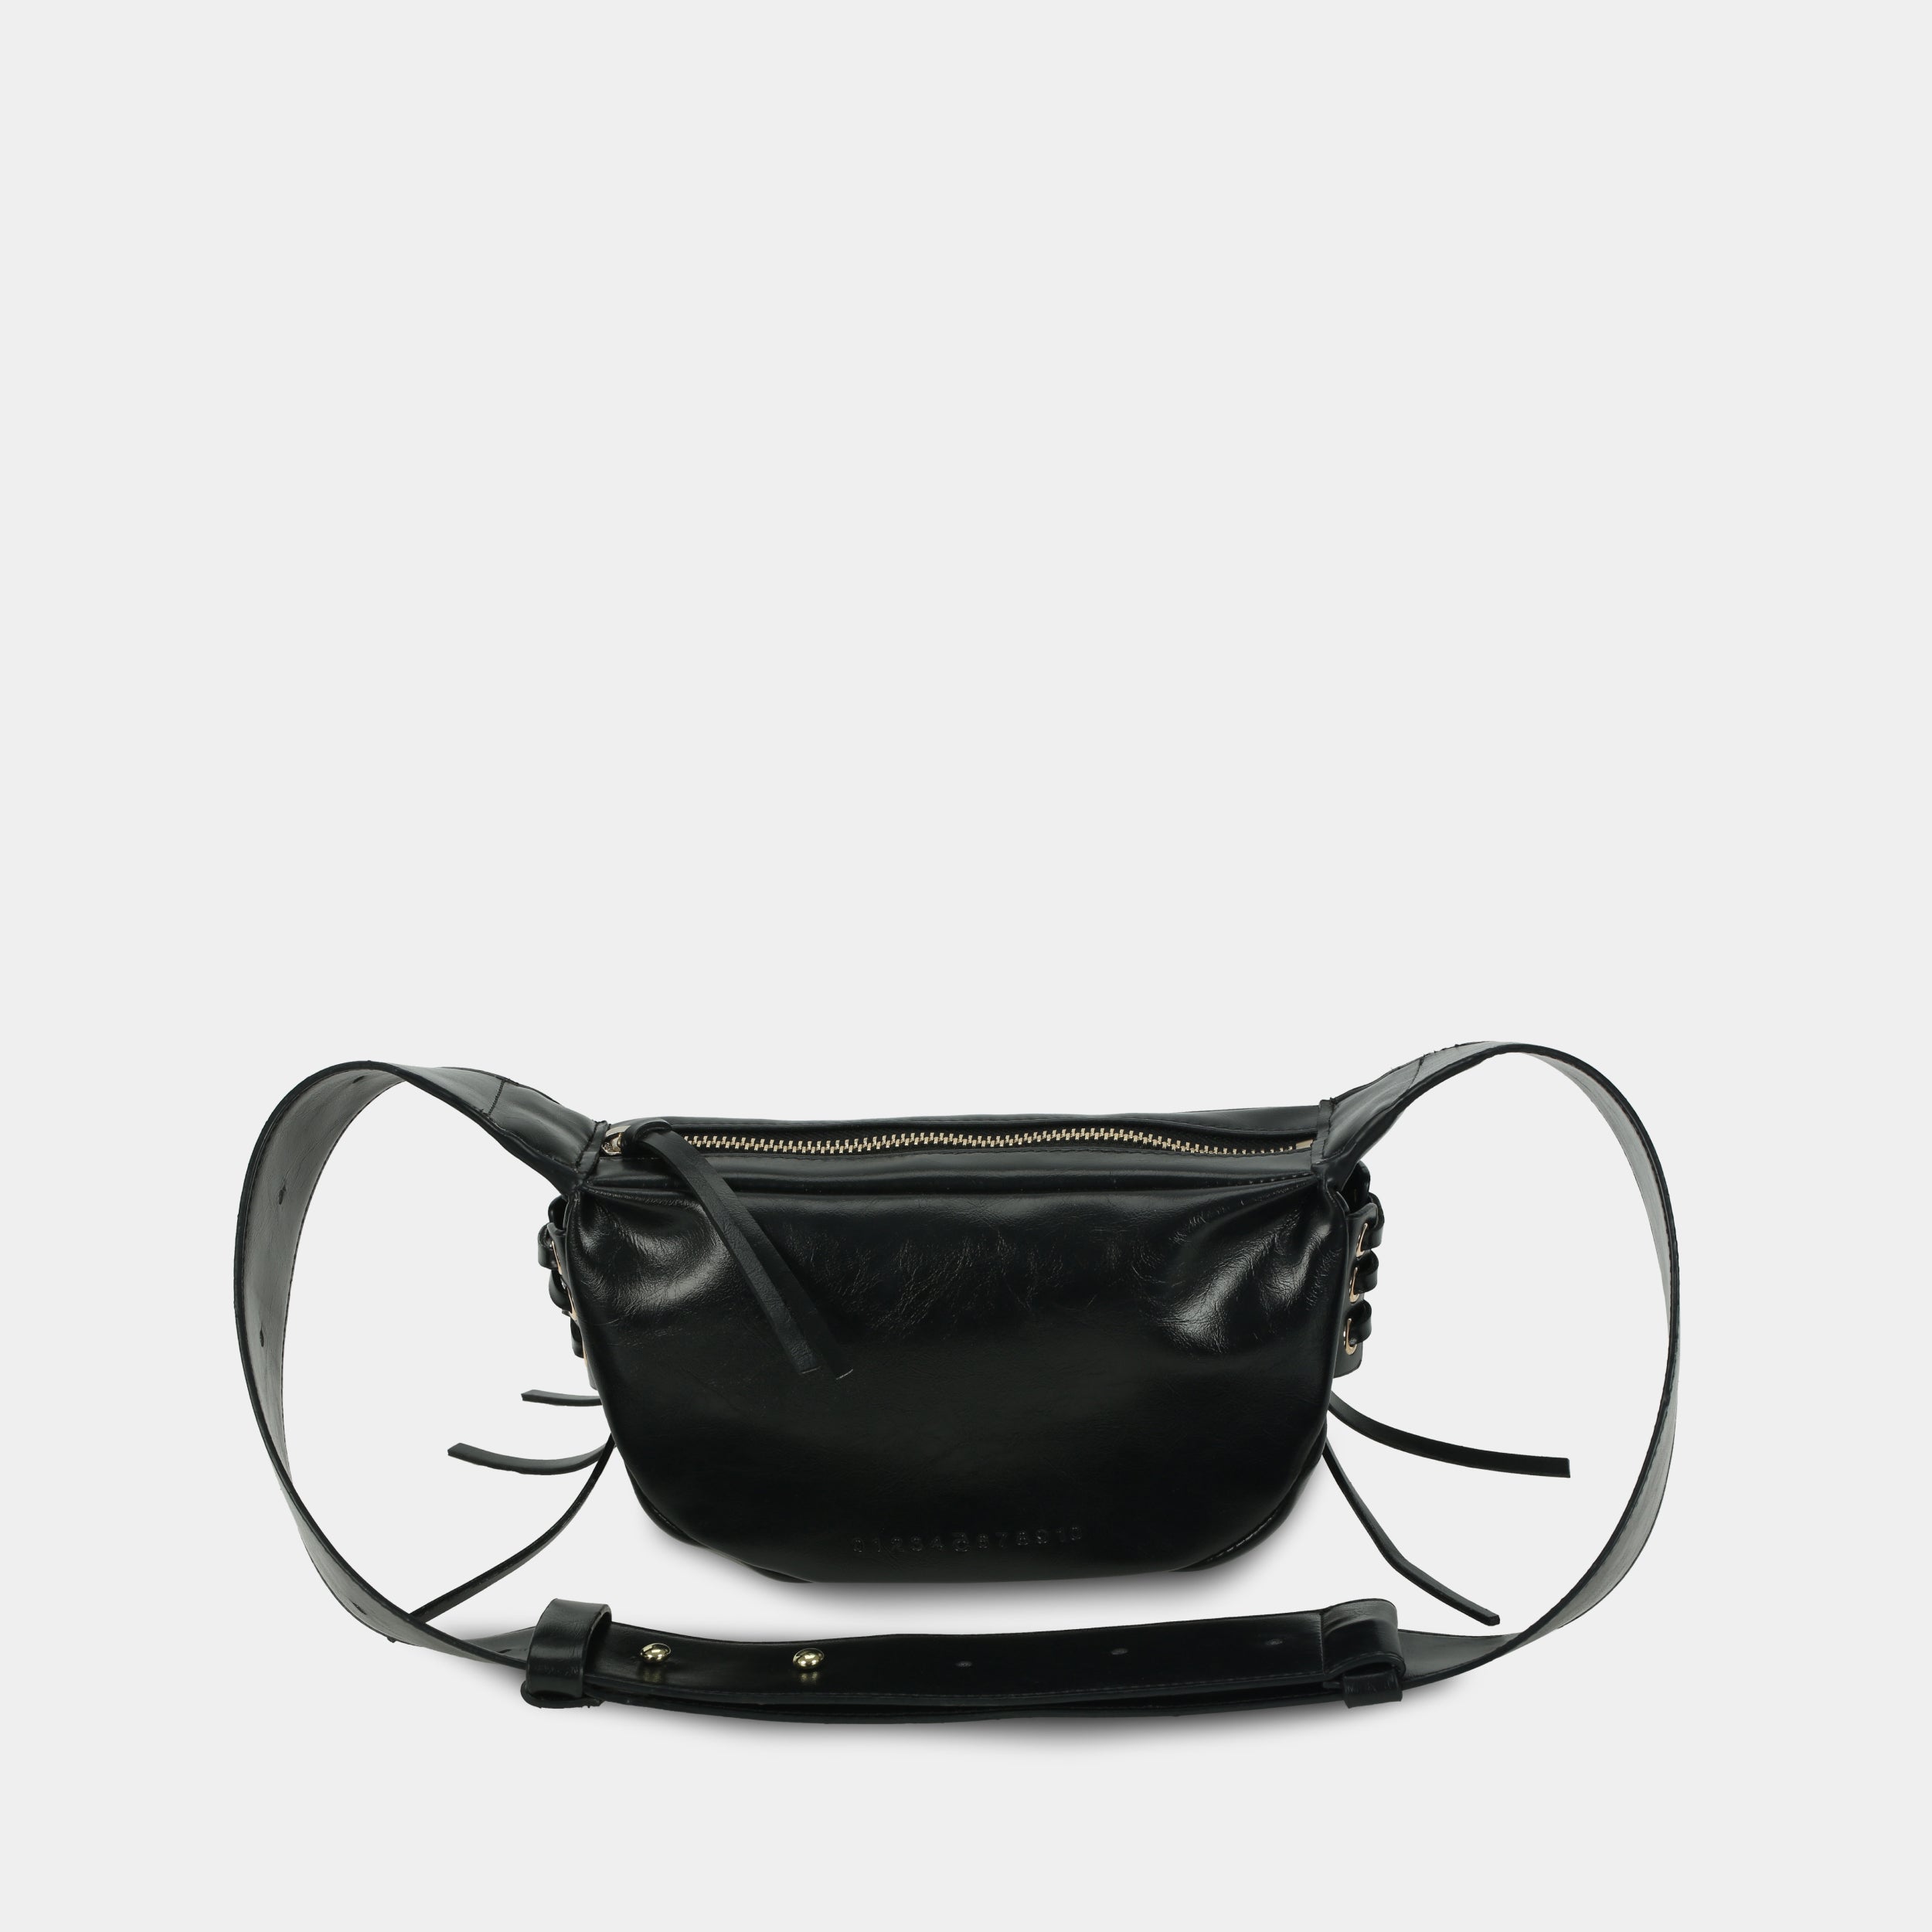 LACE bag small size (S) black